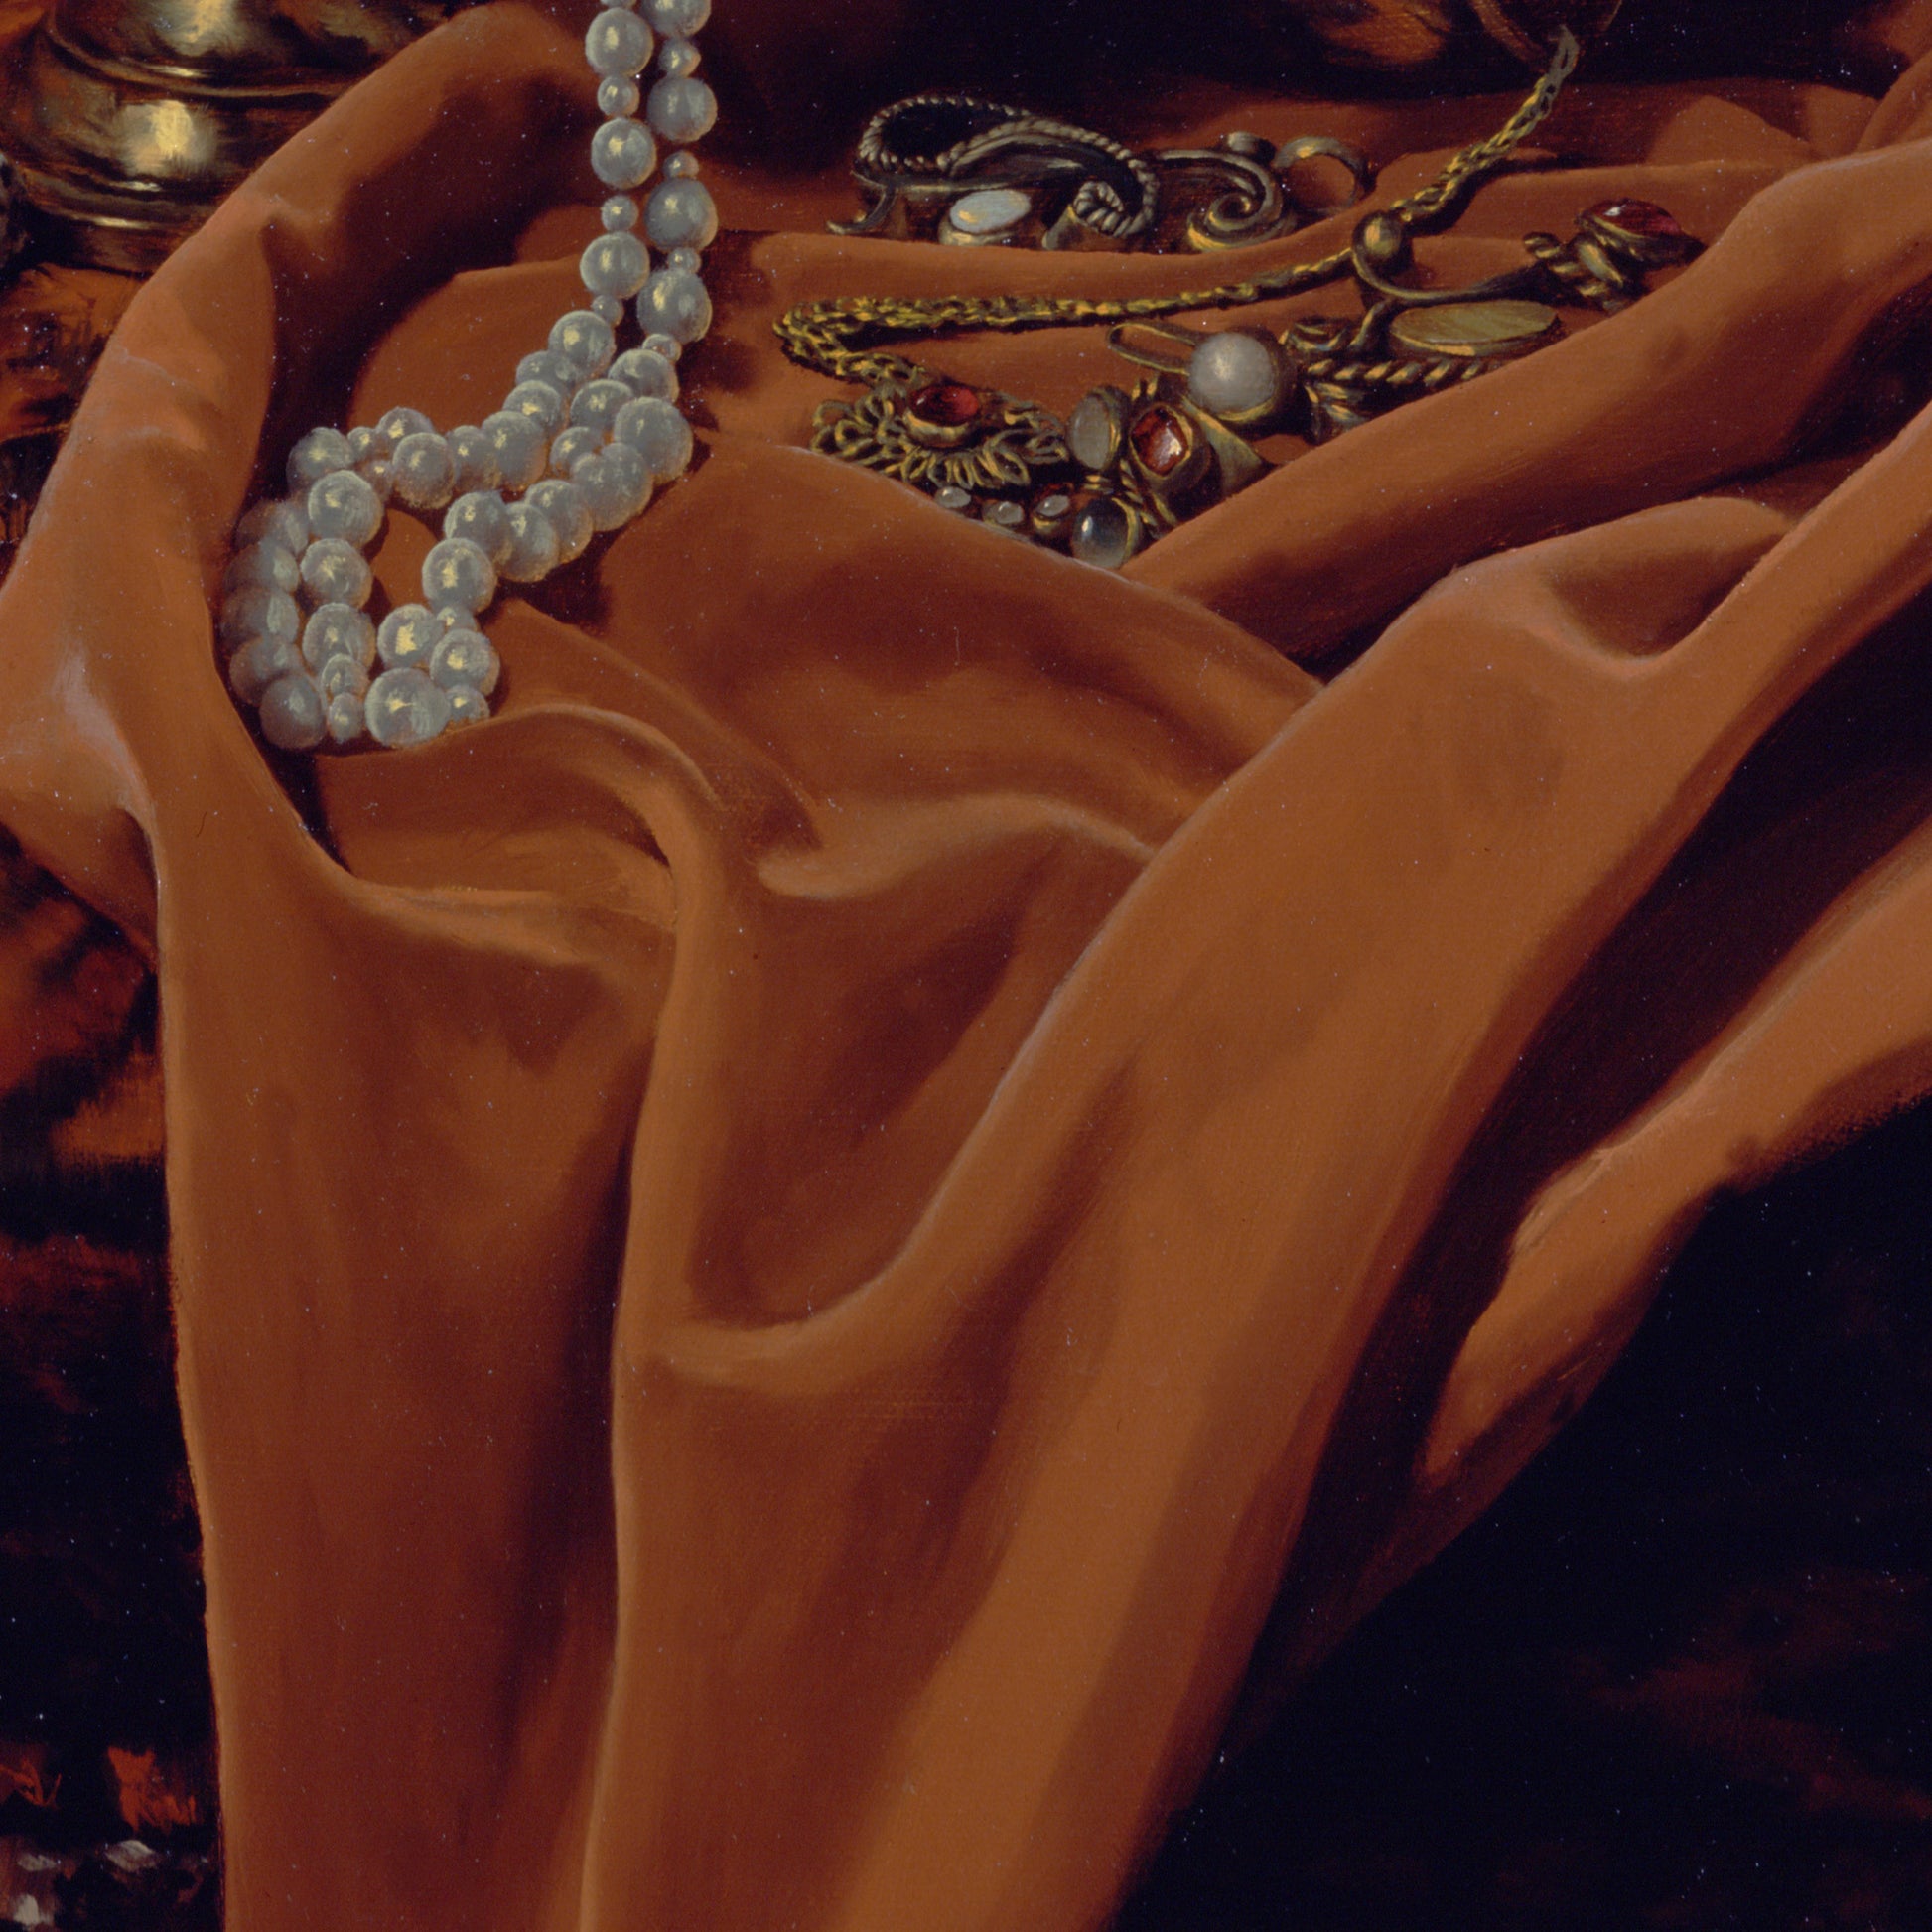 painting of jewelry and pearls on a cloth, in the style of dark orange and light bronze, flowing draperies, realist attention to detail, manapunk, polished craftsmanship, claire-obscure lighting, meticulous detail